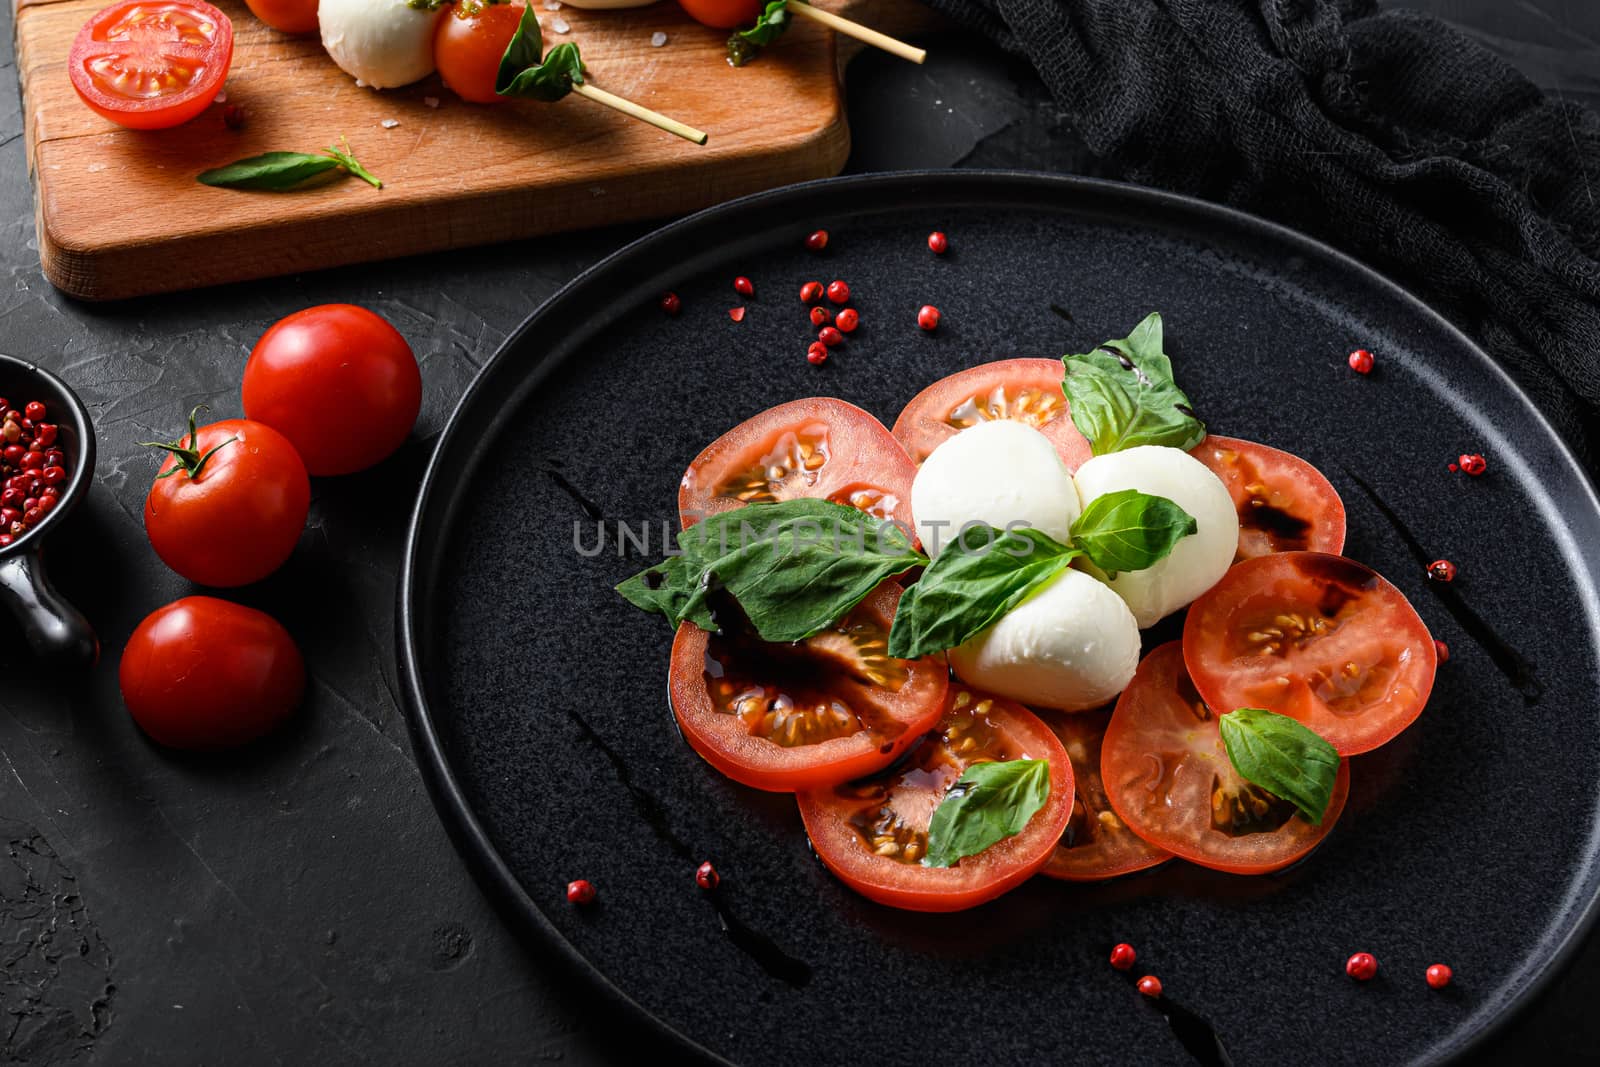 Caprese salad Tomato and mozzarella slices with basil leaves on sticks skewer and on black ceramic platwantipasta black textured background selective focus by Ilianesolenyi